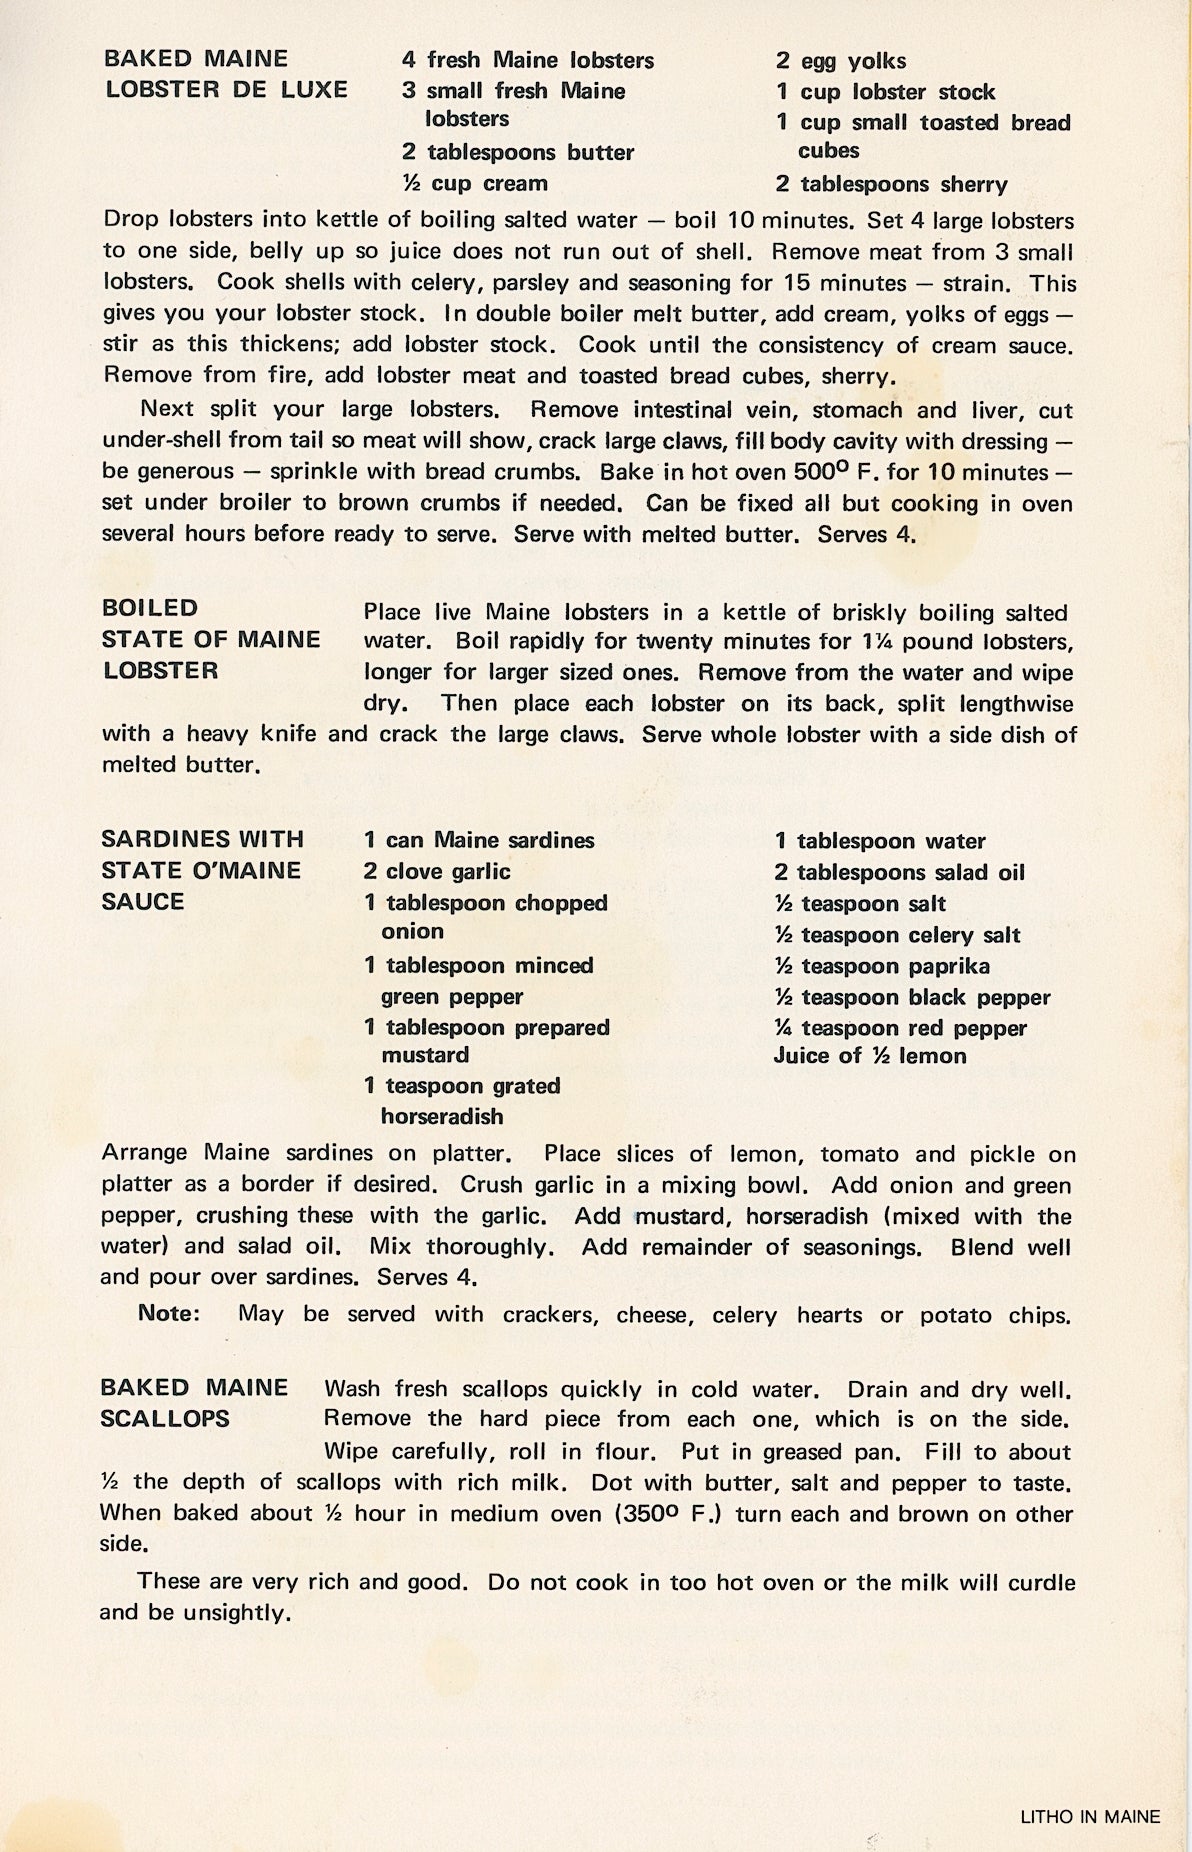 SEAFOOD DISHES FROM MAINE Recipe Pamphlet Circa 1970s